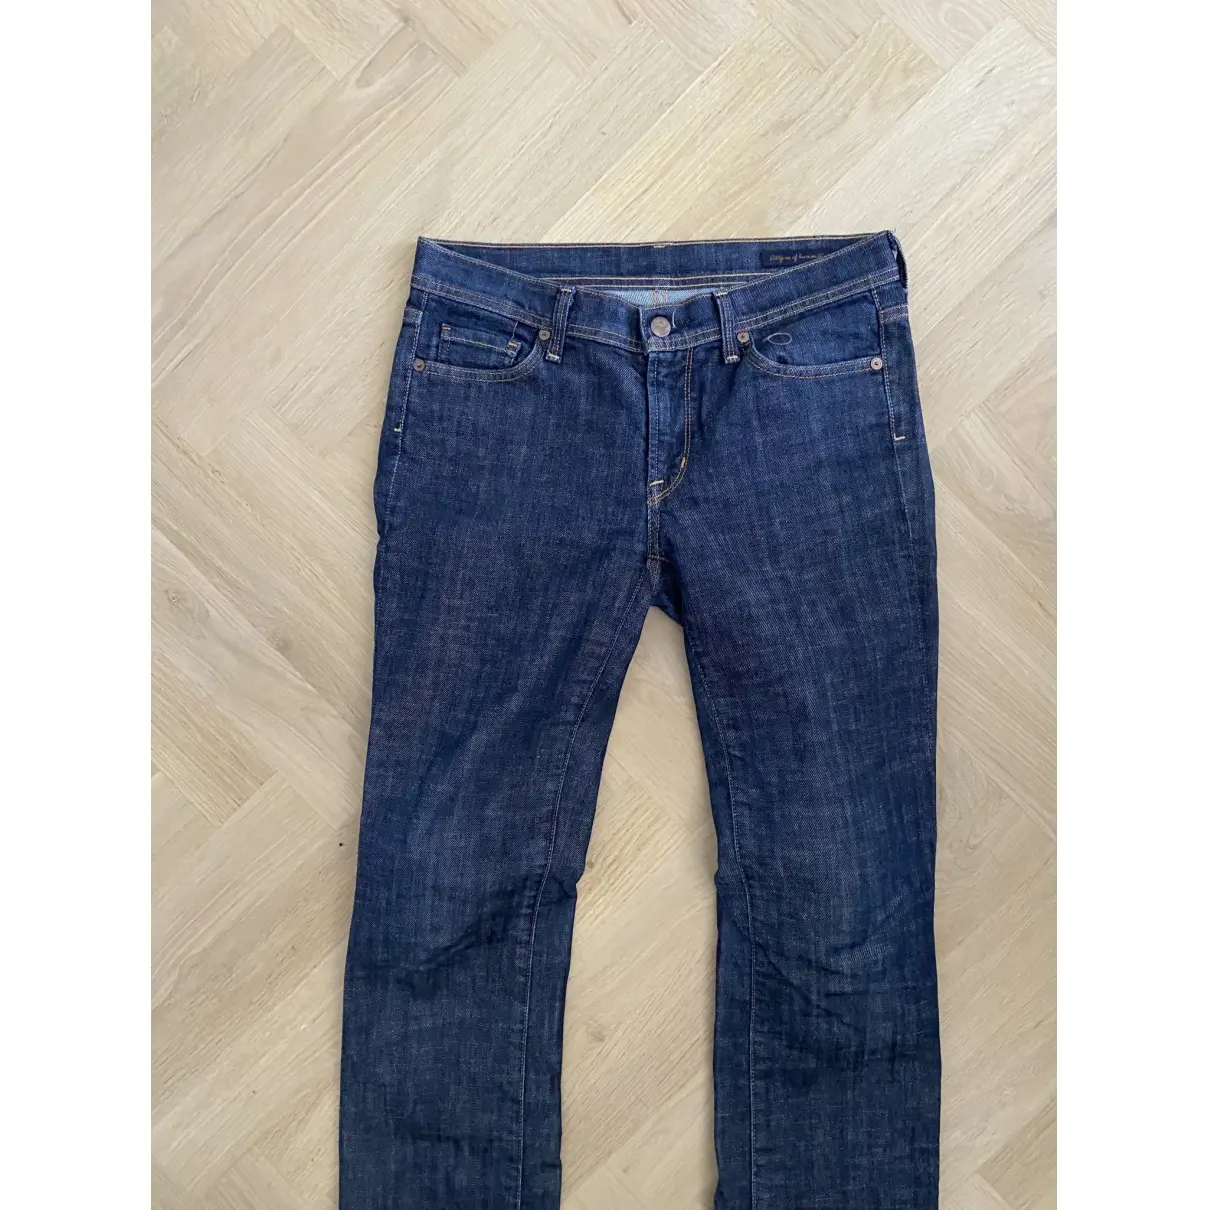 Buy 7 For All Mankind Blue Cotton Jeans online